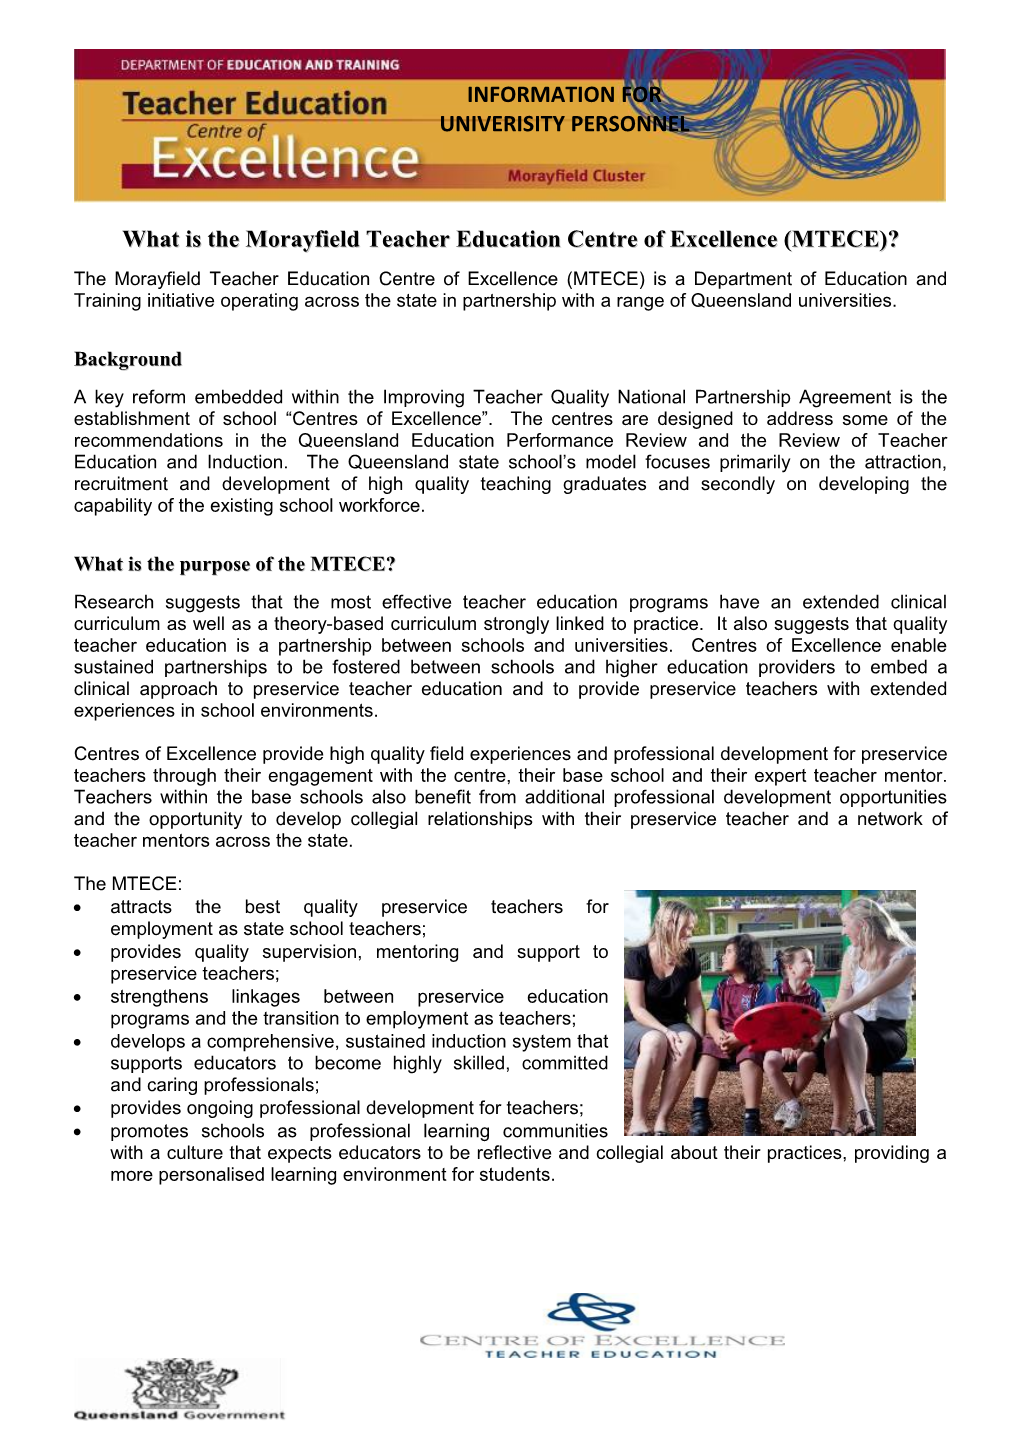 What Is the Morayfield Teacher Education Centre of Excellence (MTECE)?